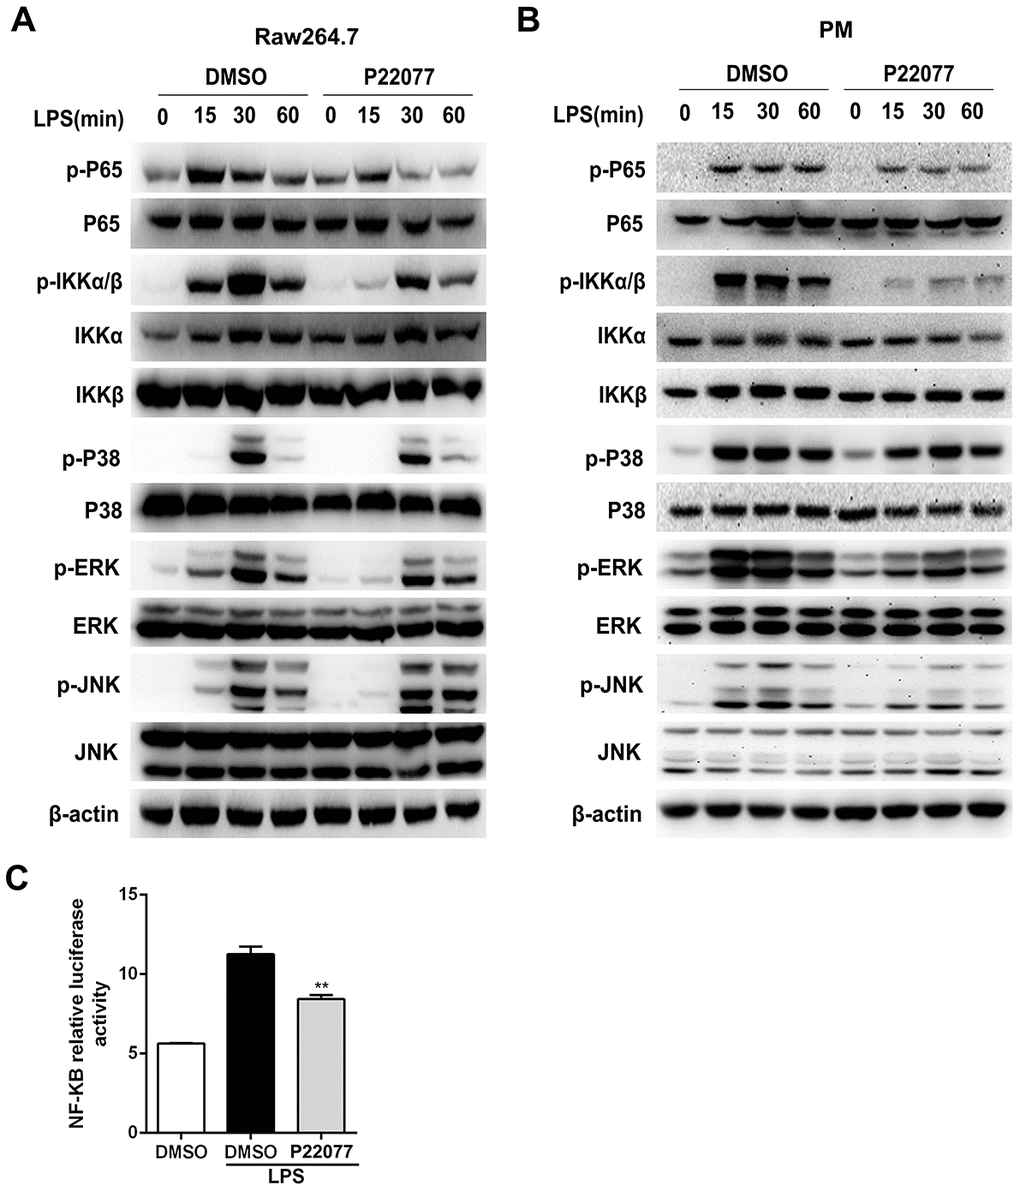 P22077 inhibits the activation of NF-κB and MAPKs signaling pathways in LPS-stimulated Raw264.7 cells and mouse peritoneal macrophages. (A) Raw264.7 cells were pretreated with DMSO and P22077 (7.5 μM) for 2 h, and then stimulated with LPS (100 ng/ml) for the indicated times and analyzed the indicated proteins by immunoblot. (B) Mouse peritoneal macrophages were pretreated with DMSO and P22077 (7.5 μM) for 2 h, and then stimulated with LPS (100 ng/ml) for the indicated times and analyzed the indicated proteins by immunoblot. (C) RAW 264.7 cells were transfected with NF-κB luciferase reporter plasmid and Renilla luciferase construct phRL-TK plasmid for 24 h and pretreated with the P22077 (7.5 μM) for 2 h before stimulation with 100ng/ml LPS for 4 h and luciferase activity was measured. Similar results were obtained from three independent experiments and data were presented as mean ± SD of one representative experiment. **P